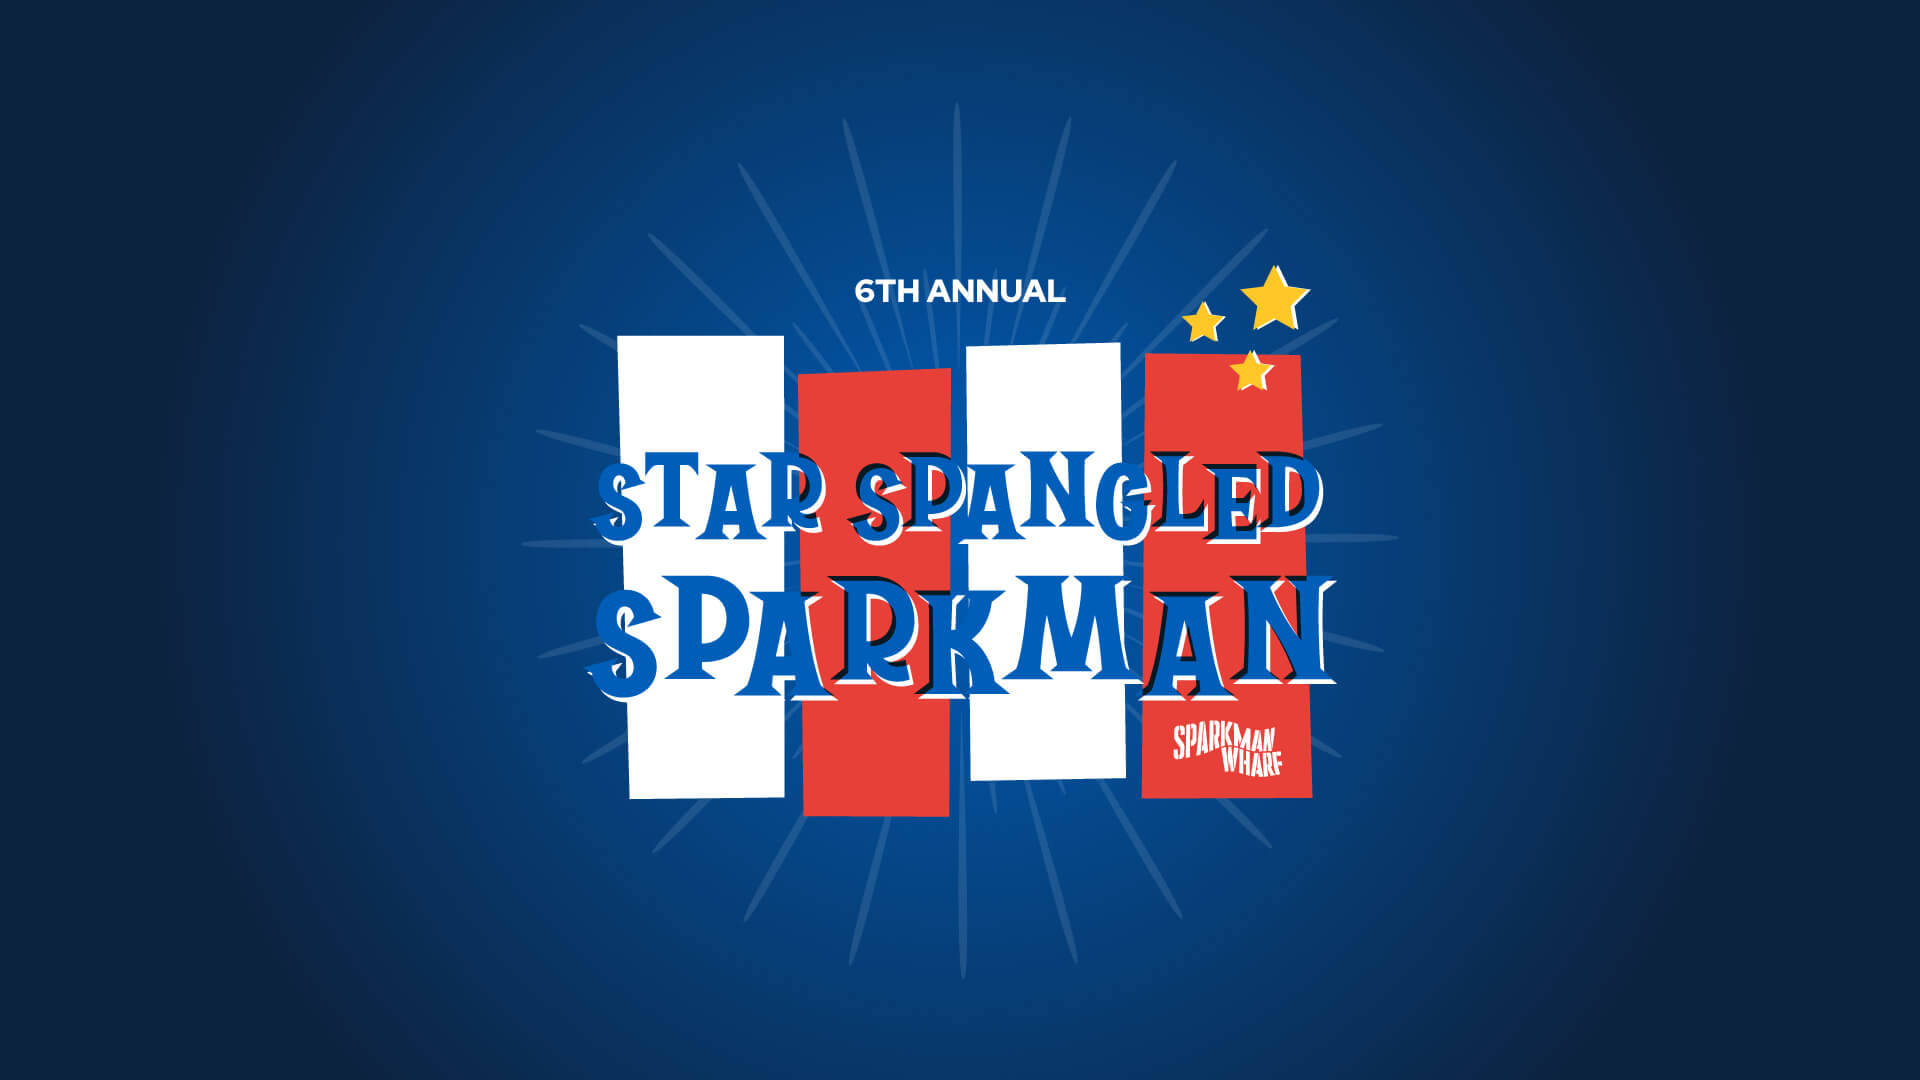 A graphical representation of Star Spangled Sparkman at Sparkman Wharf in Water Street Tampa